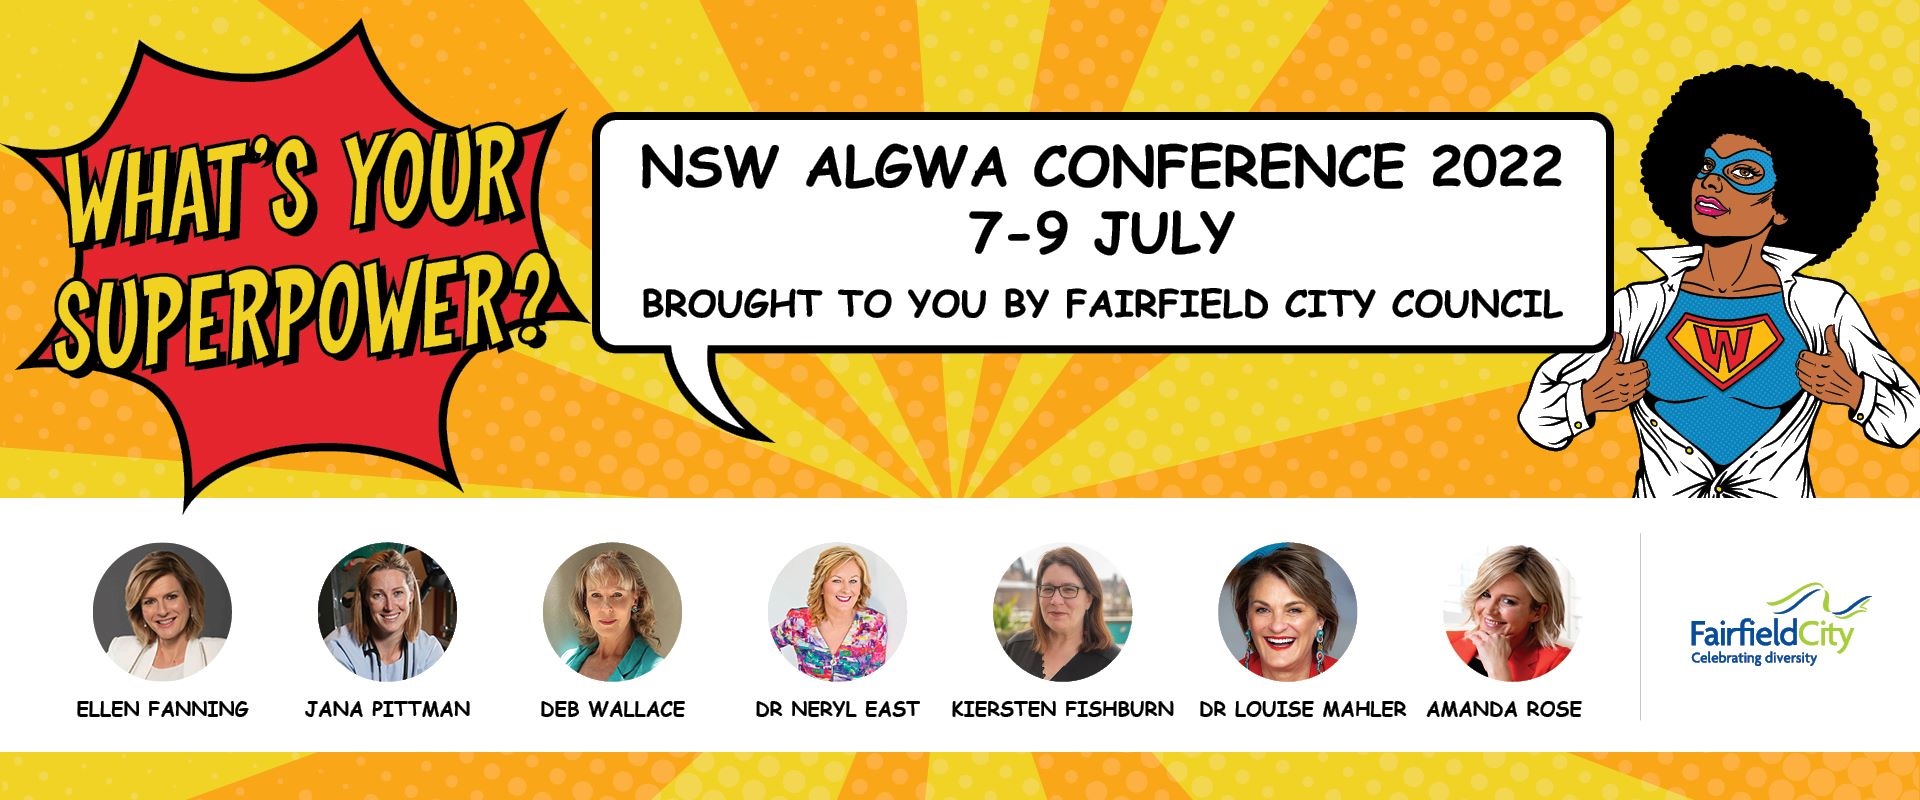 NSW ALGWA conference banner for 7-9 July 2022 featuring Ellen Fanning, Jana Pittman, Deb Wallace, Dr Neryl East, Kiersten Fishburn, Dr Louise Mahler and Amanda Rose